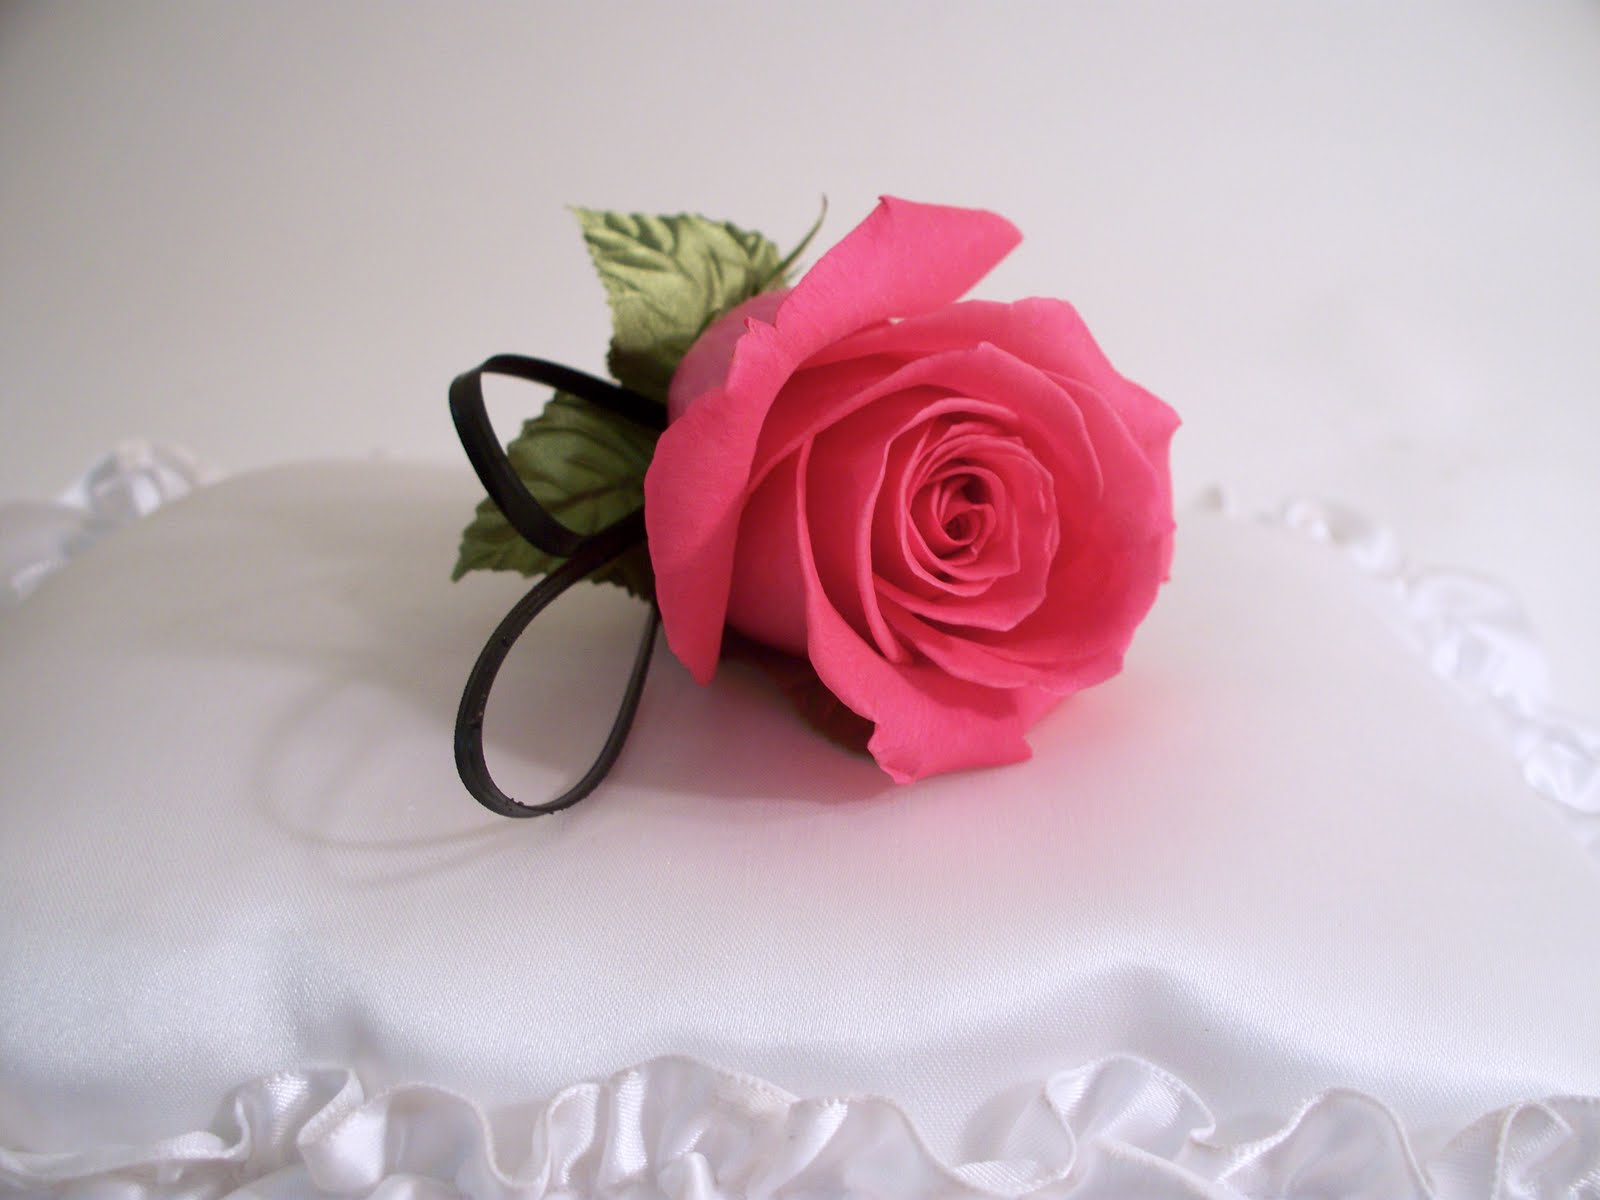 A lovely hot pink rose with